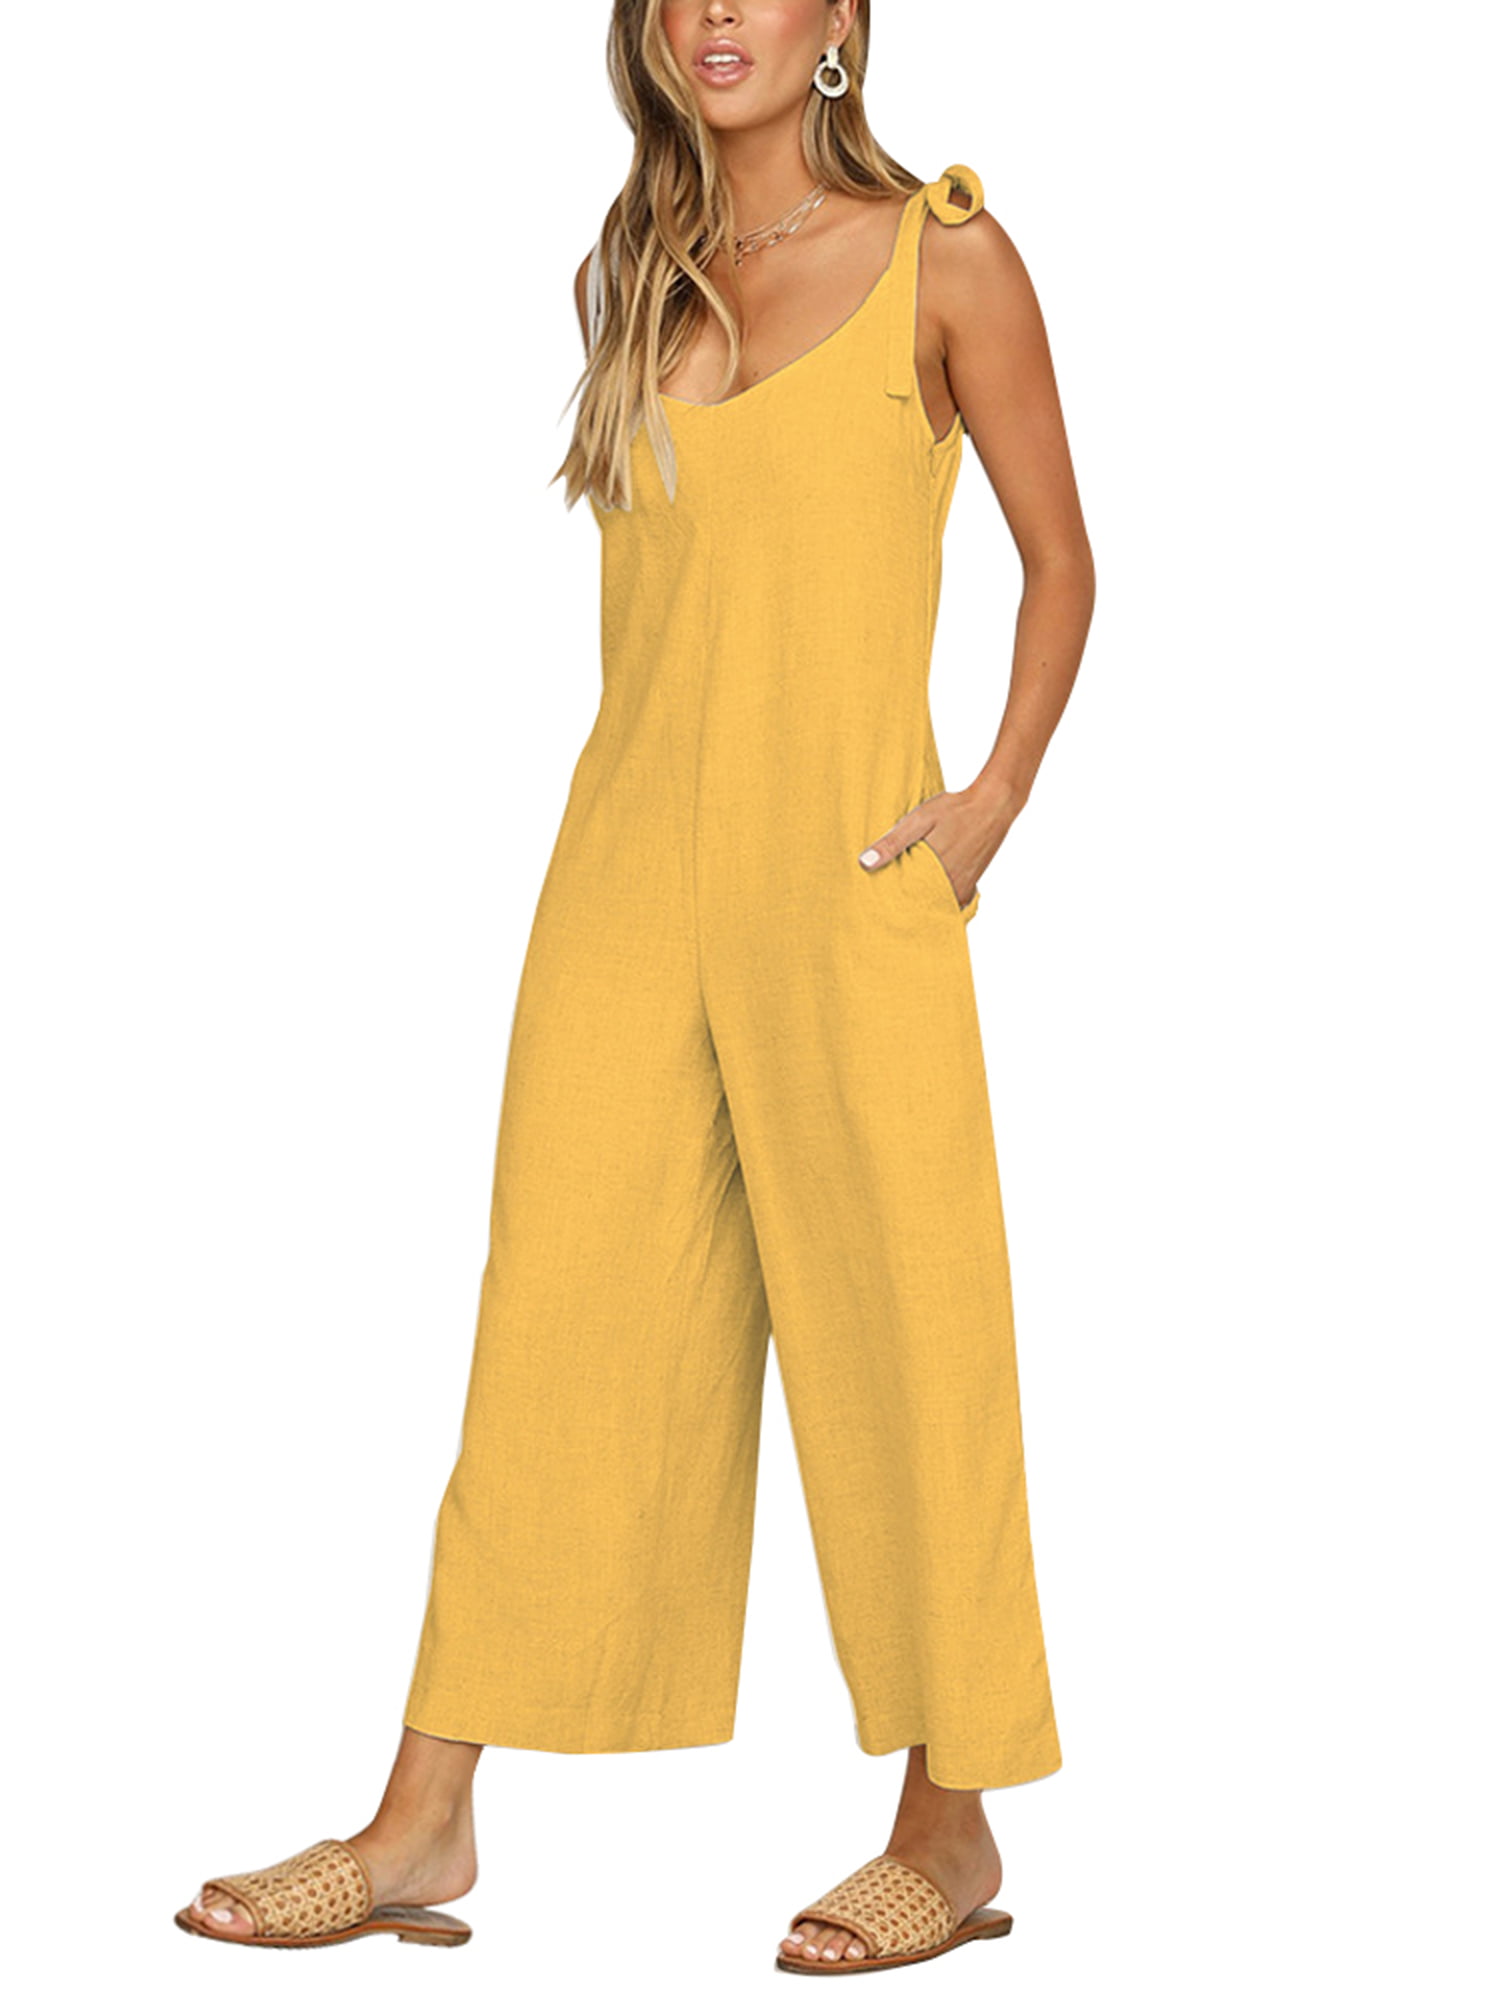 Womens Fashion Baggy Cotton Linen Overalls Adjustable Straps Zipper Drawstring Pants Jumpsuits with Pockets